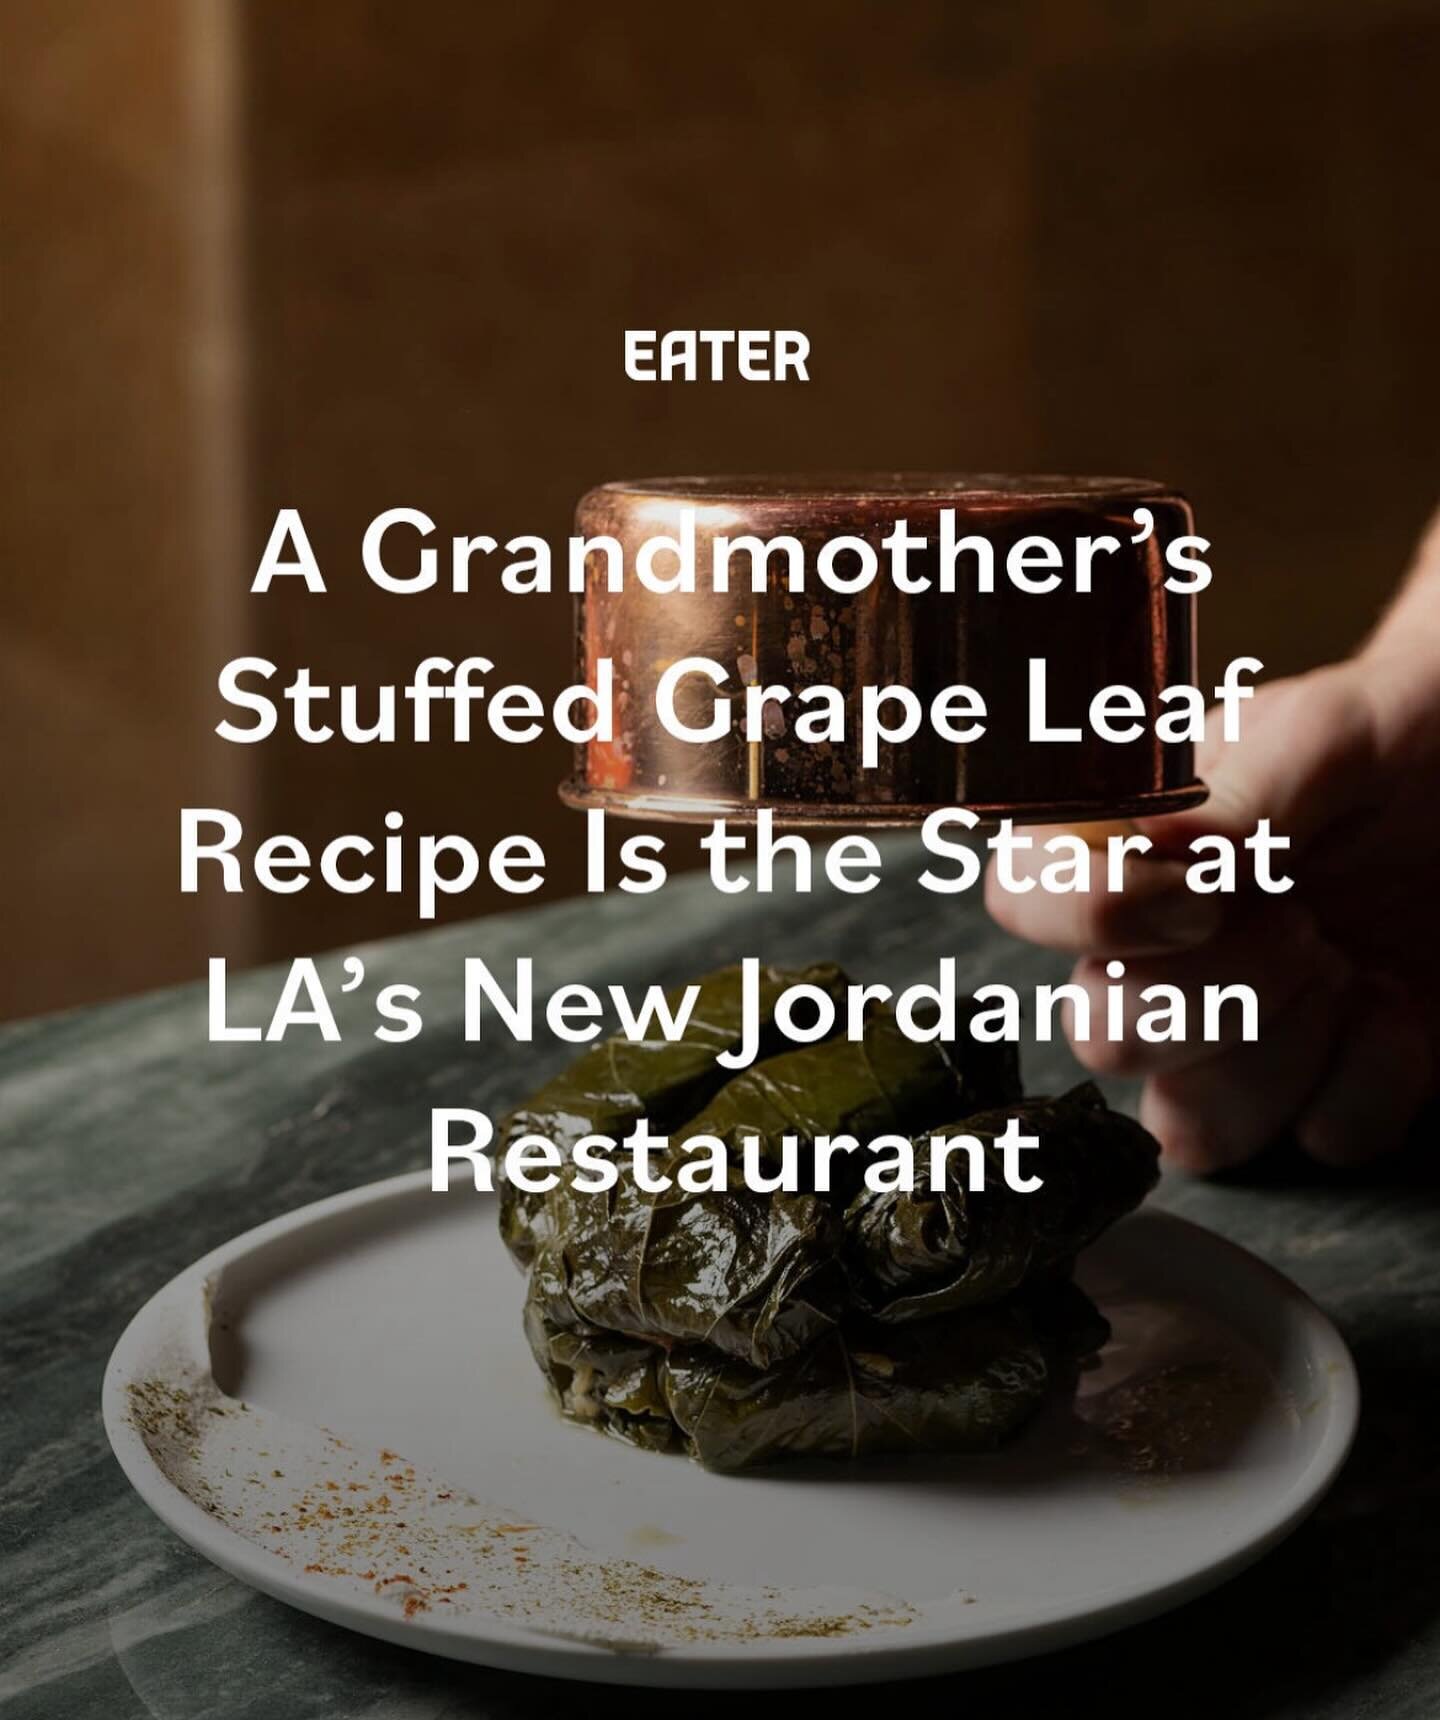 Thank you @eater_la #Repost

Layla (@laylarestaurantsm), the new restaurant from Chris Sayegh (@theherbalchef), draws from the chef&rsquo;s Jordanian upbringing and his grandmother&rsquo;s (and the restaurant&rsquo;s namesake) cooking.

Opened on Mar